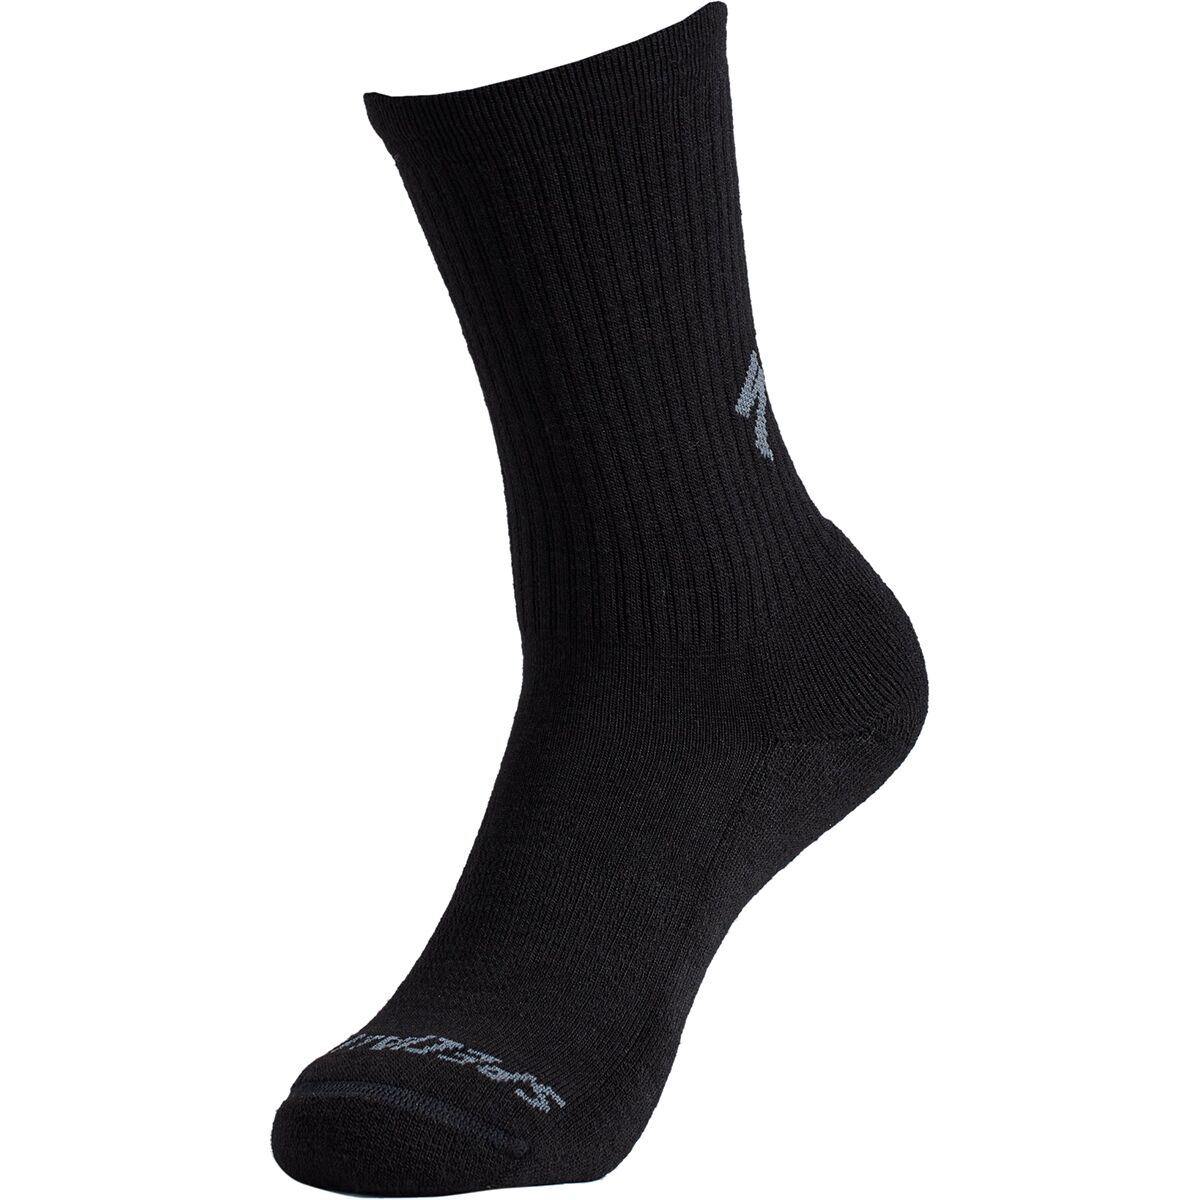 Specialized Merino Midweight Tall Sock - Men's